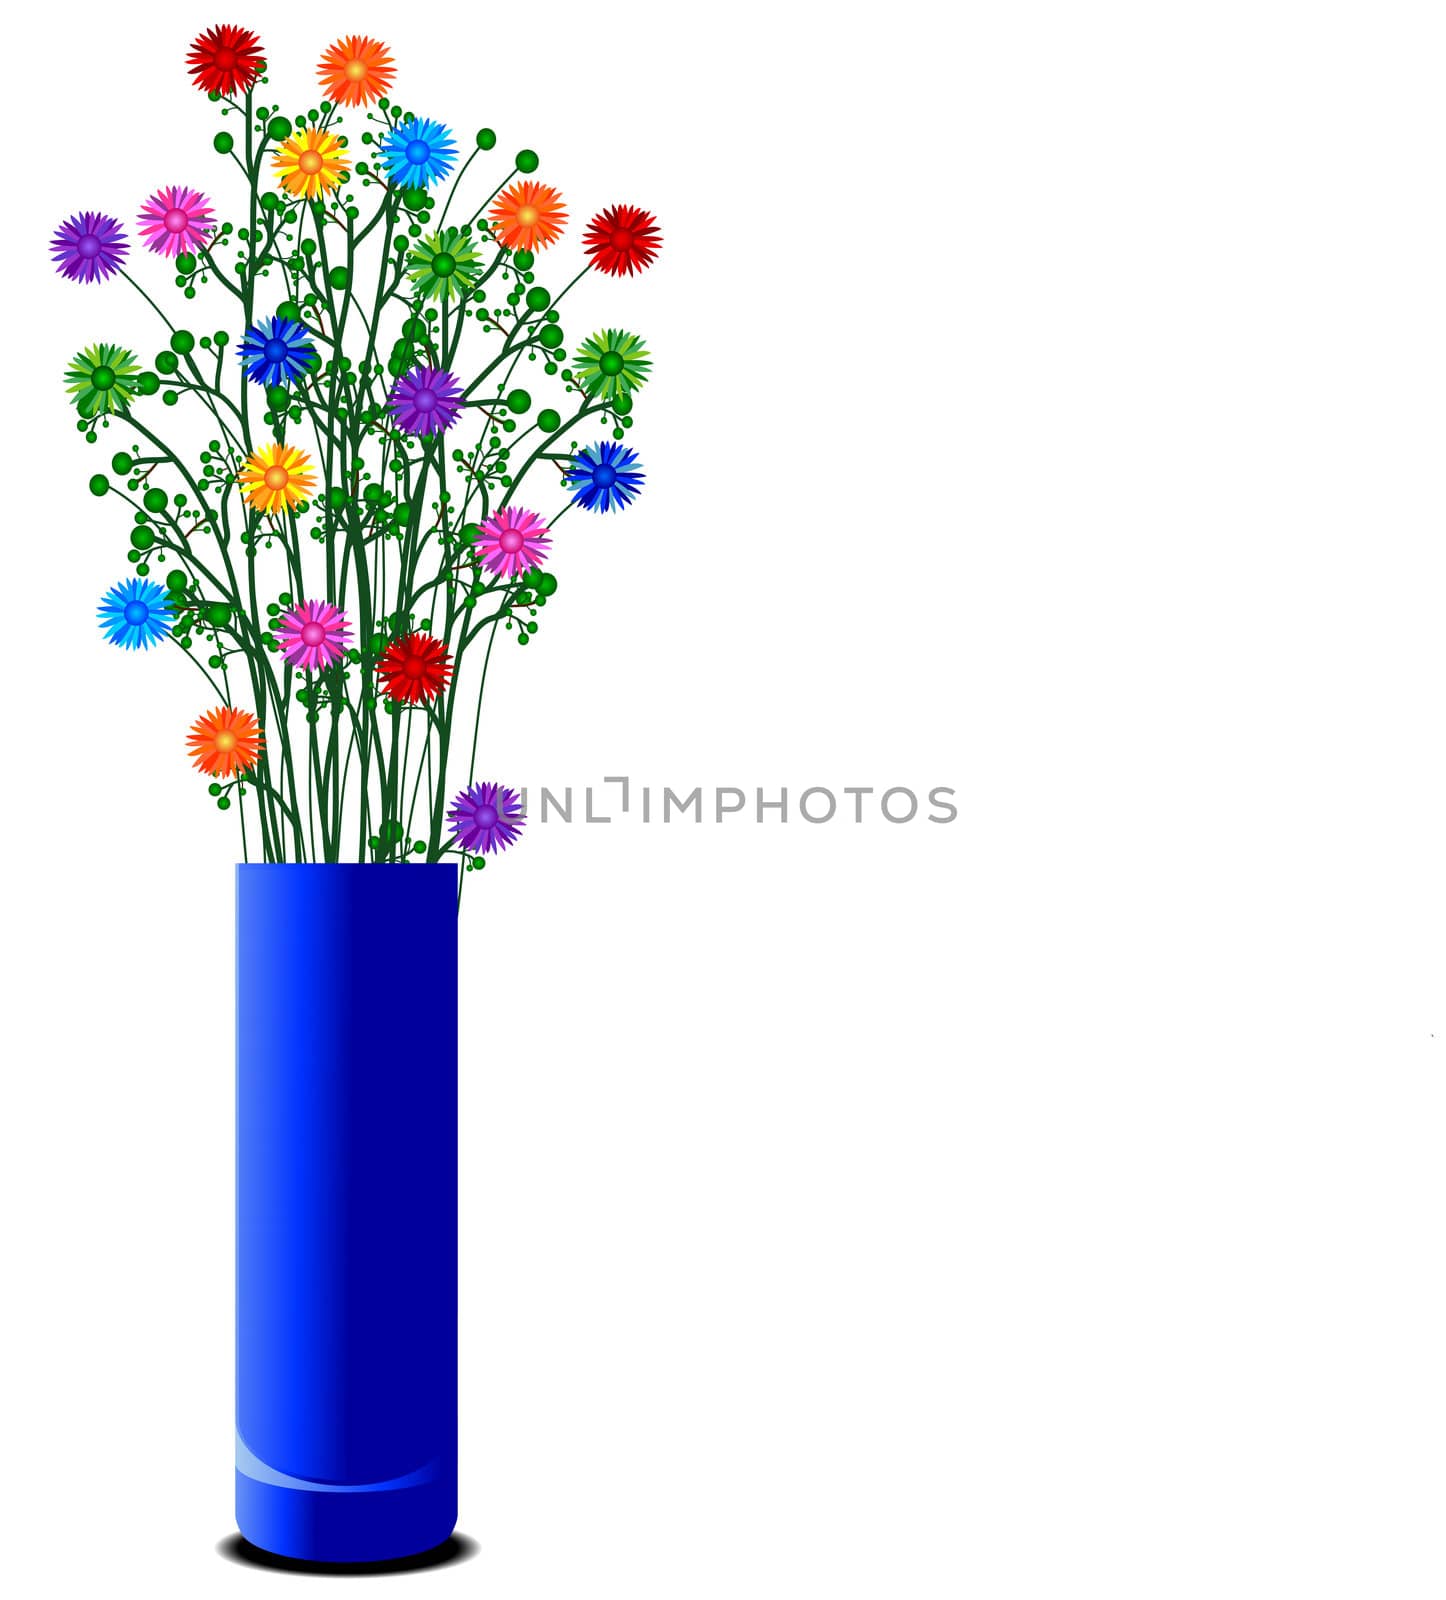 vase with colorful flowers by peromarketing